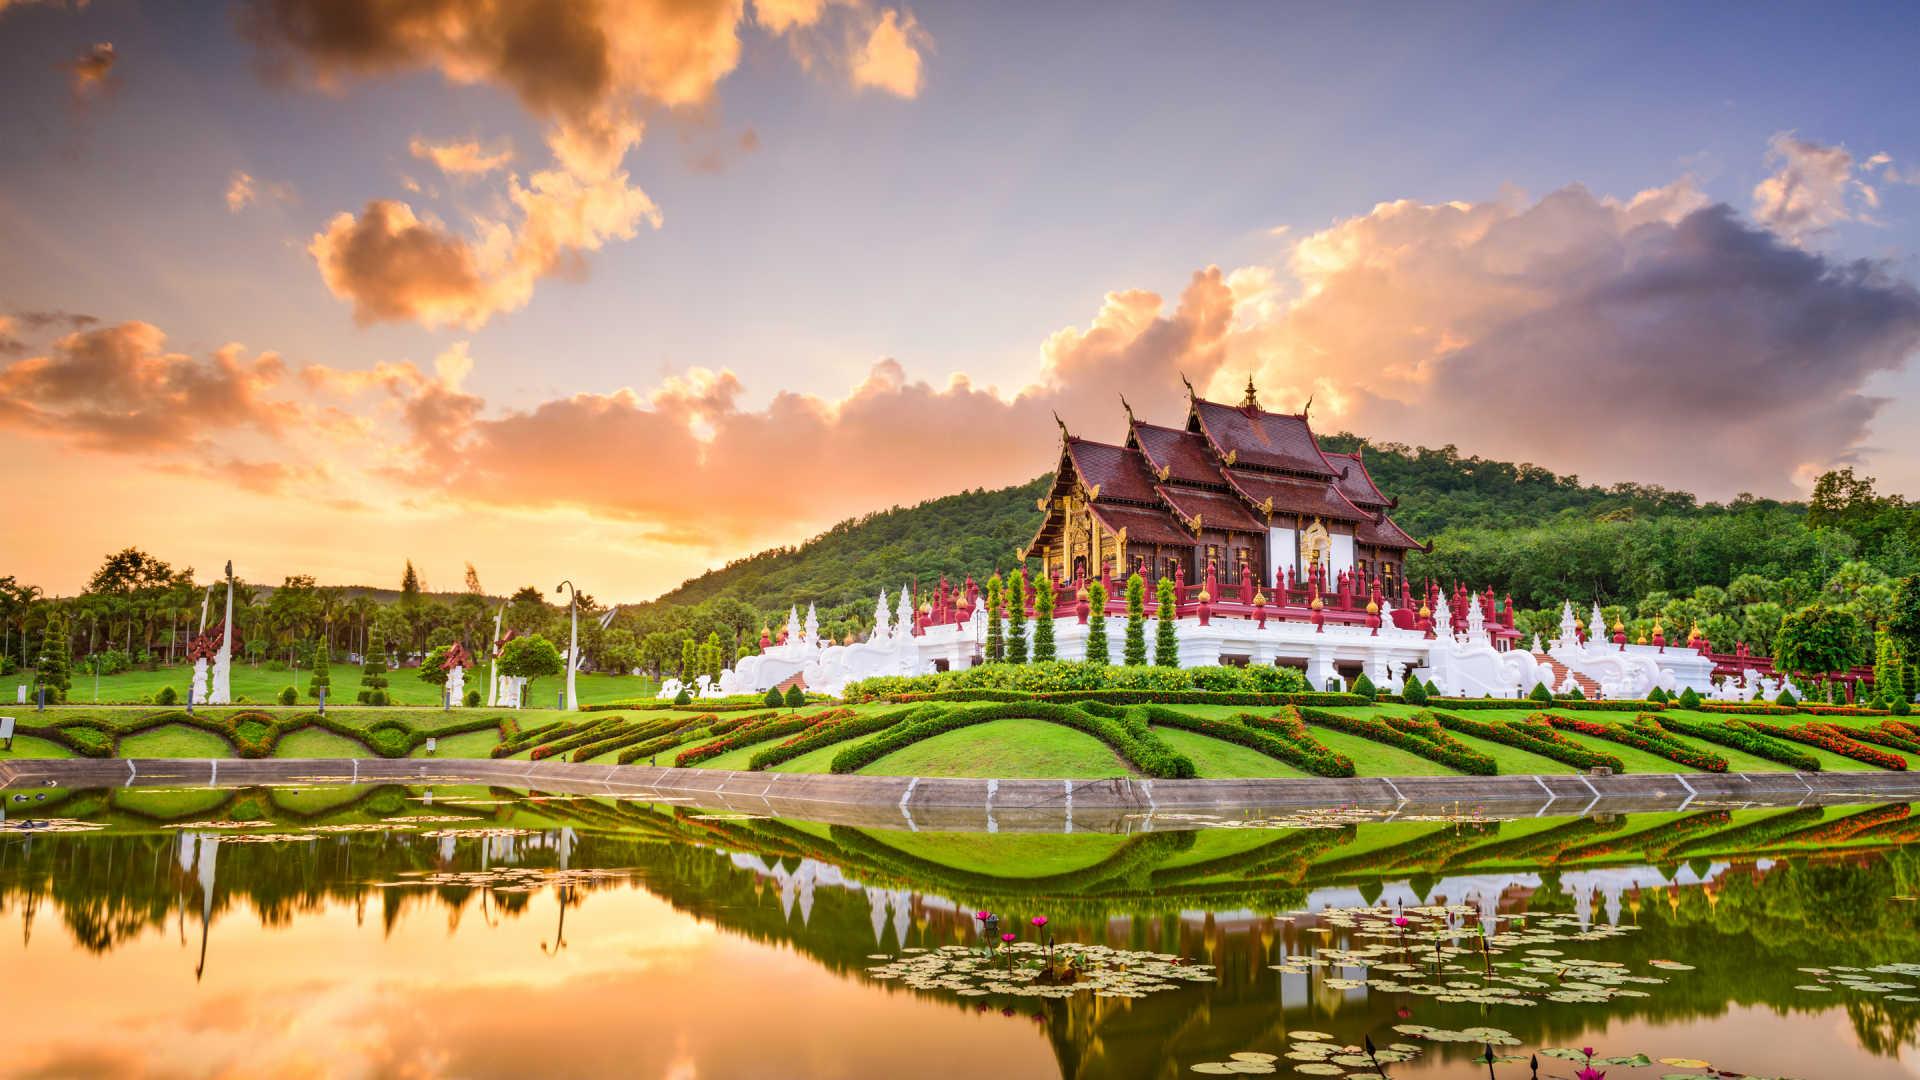 Chiang Mai & Chiang Rai Holidays. Book For 2018 19 With Our